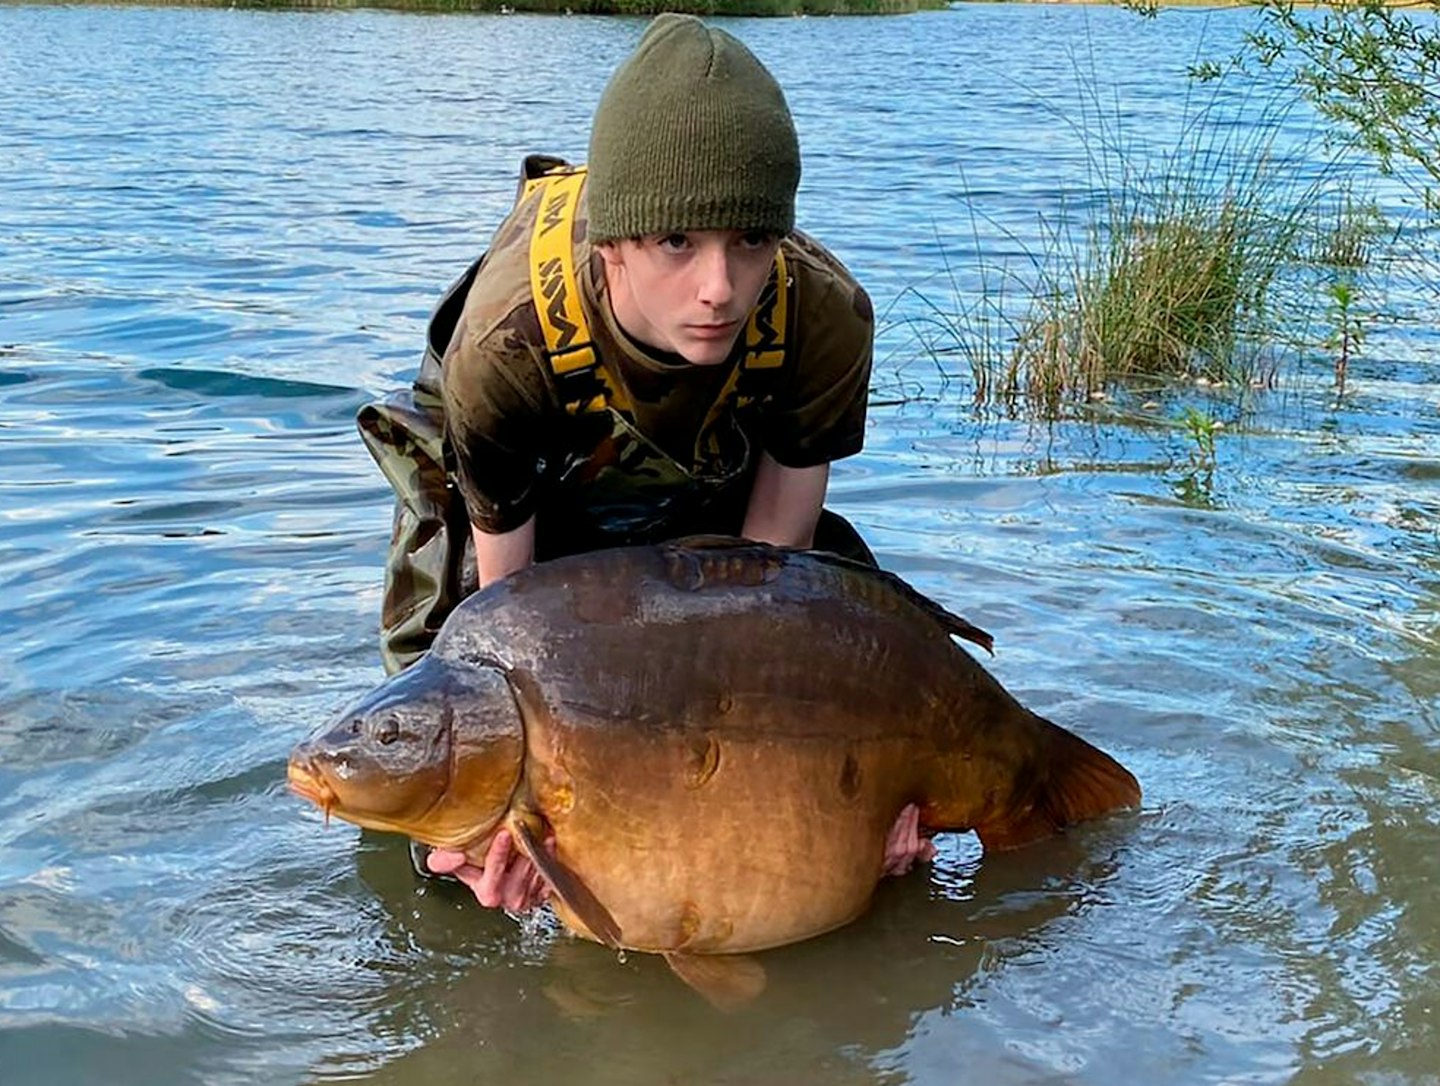 What next for the British Carp Record?